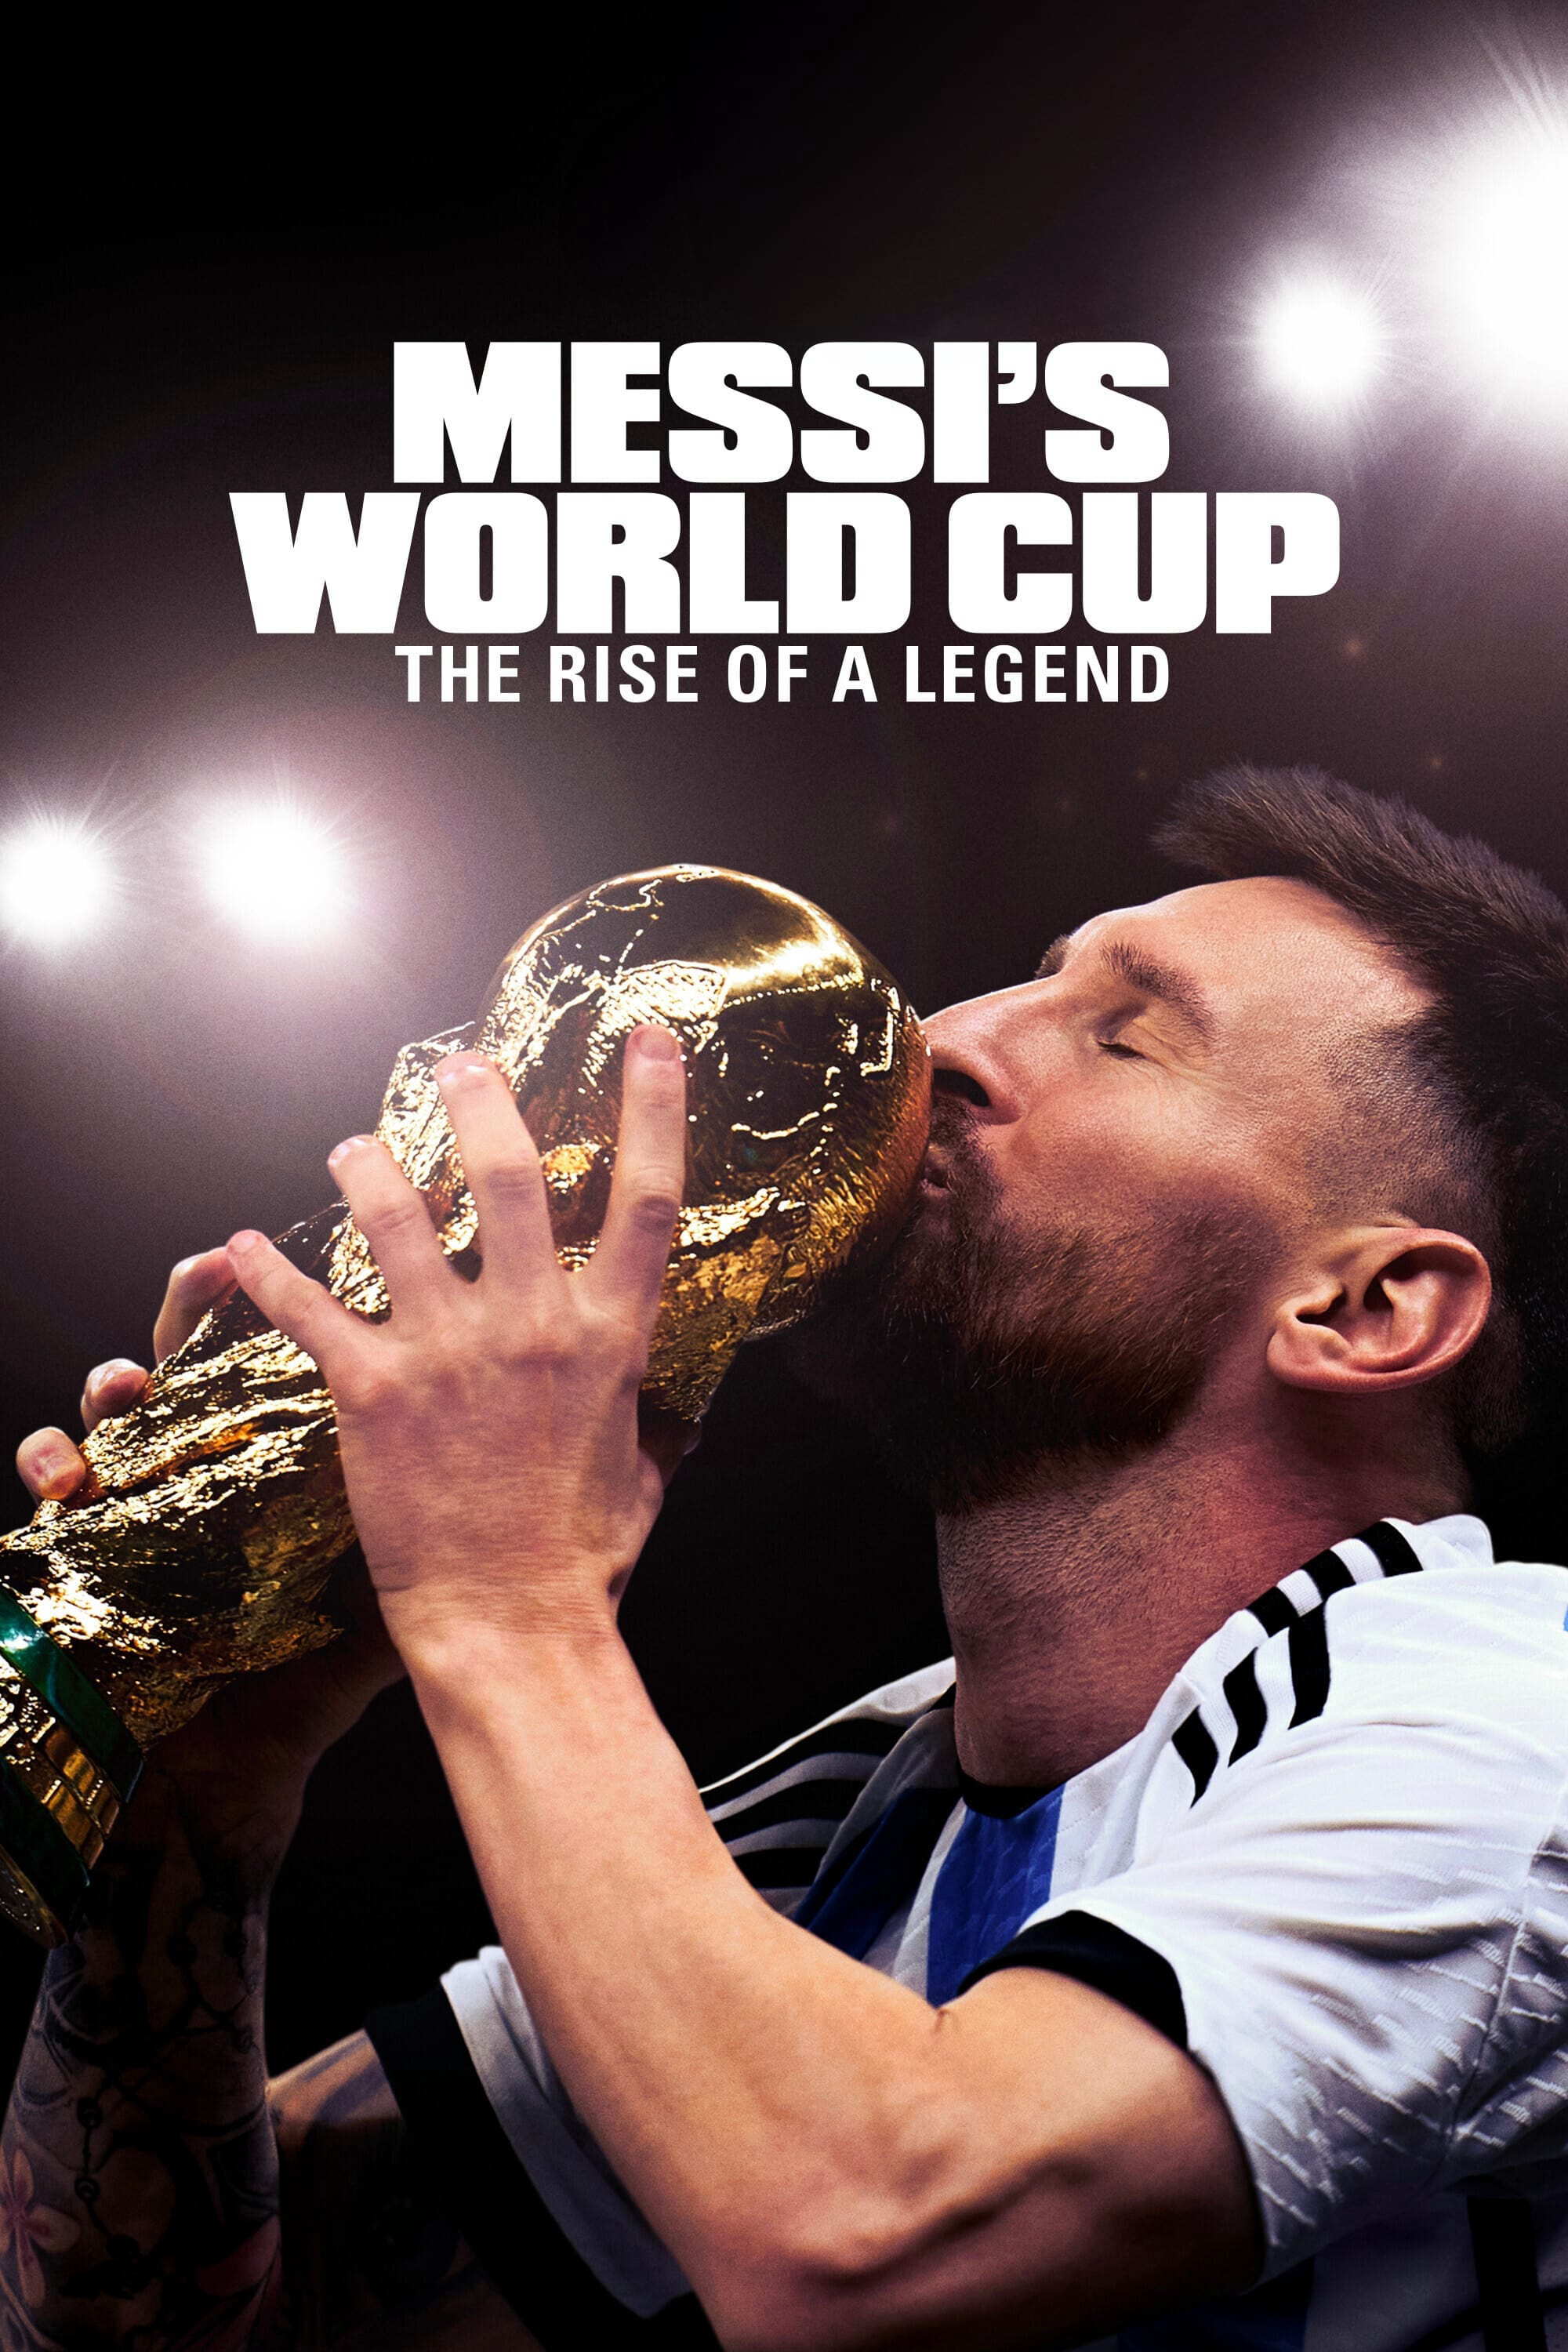 Xem Phim Kỳ World Cup Của Messi: Huyền Thoại Tỏa Sáng - Messi's World Cup: The Rise of a Legend (Messi's World Cup: The Rise of a Legend)